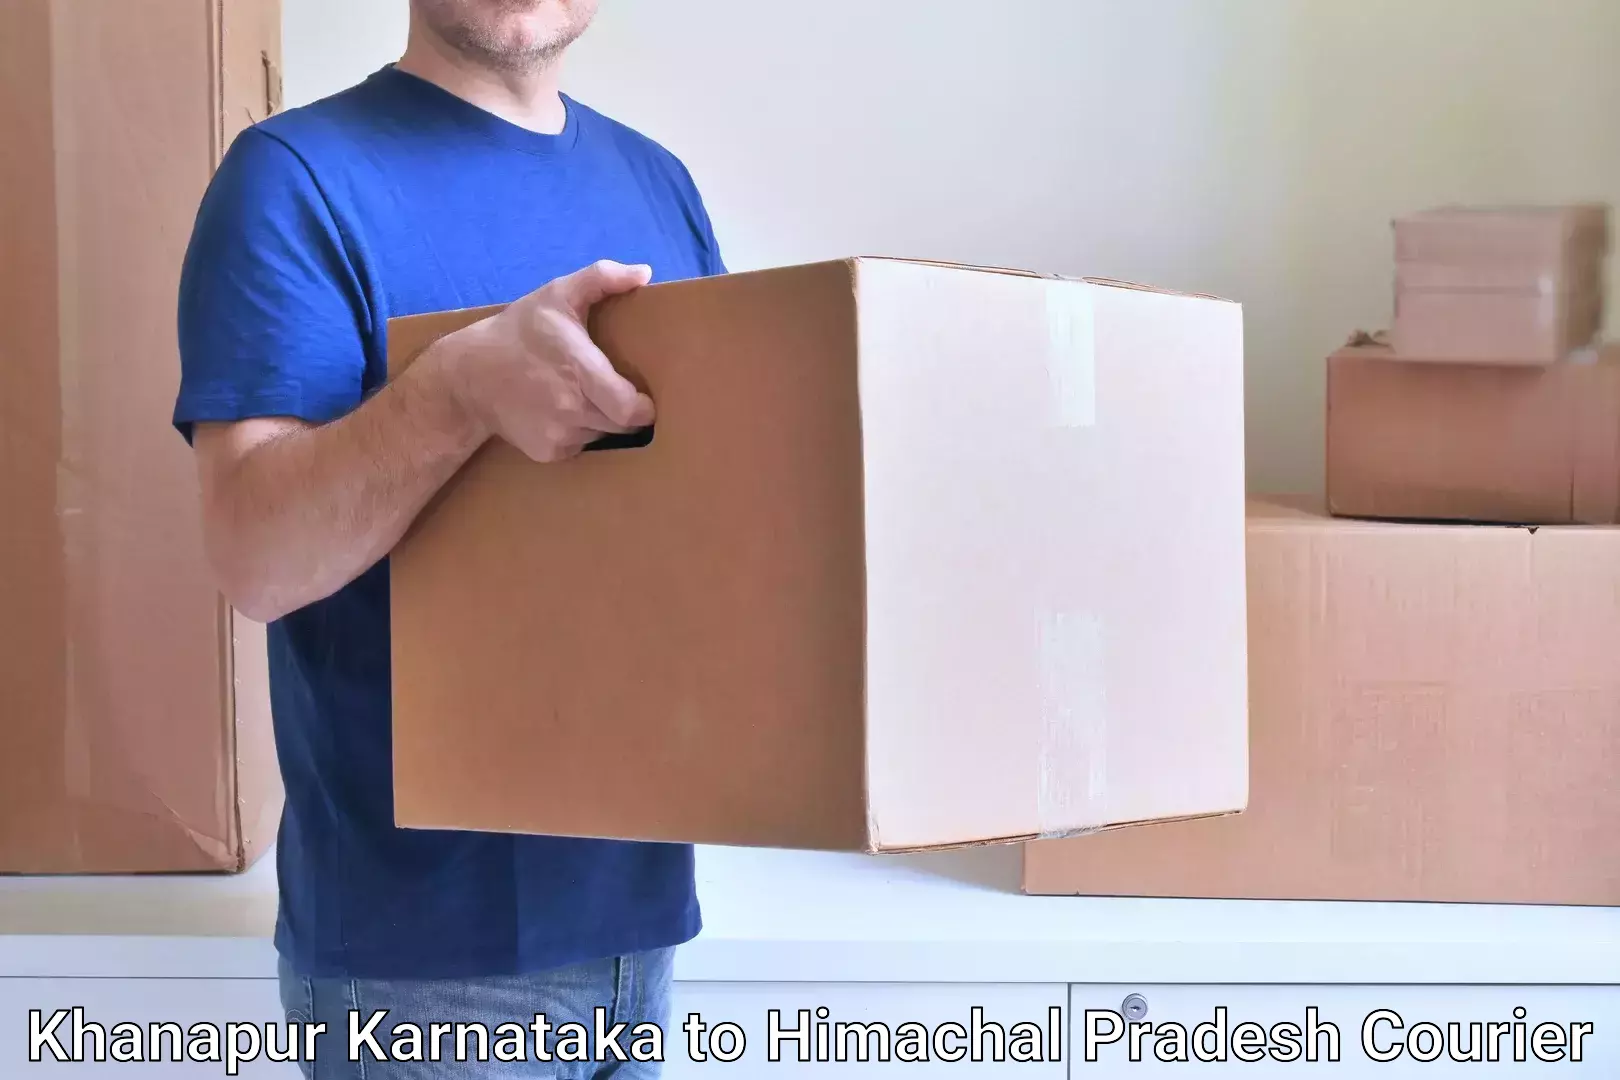 Parcel handling and care Khanapur Karnataka to YS Parmar University of Horticulture and Forestry Solan